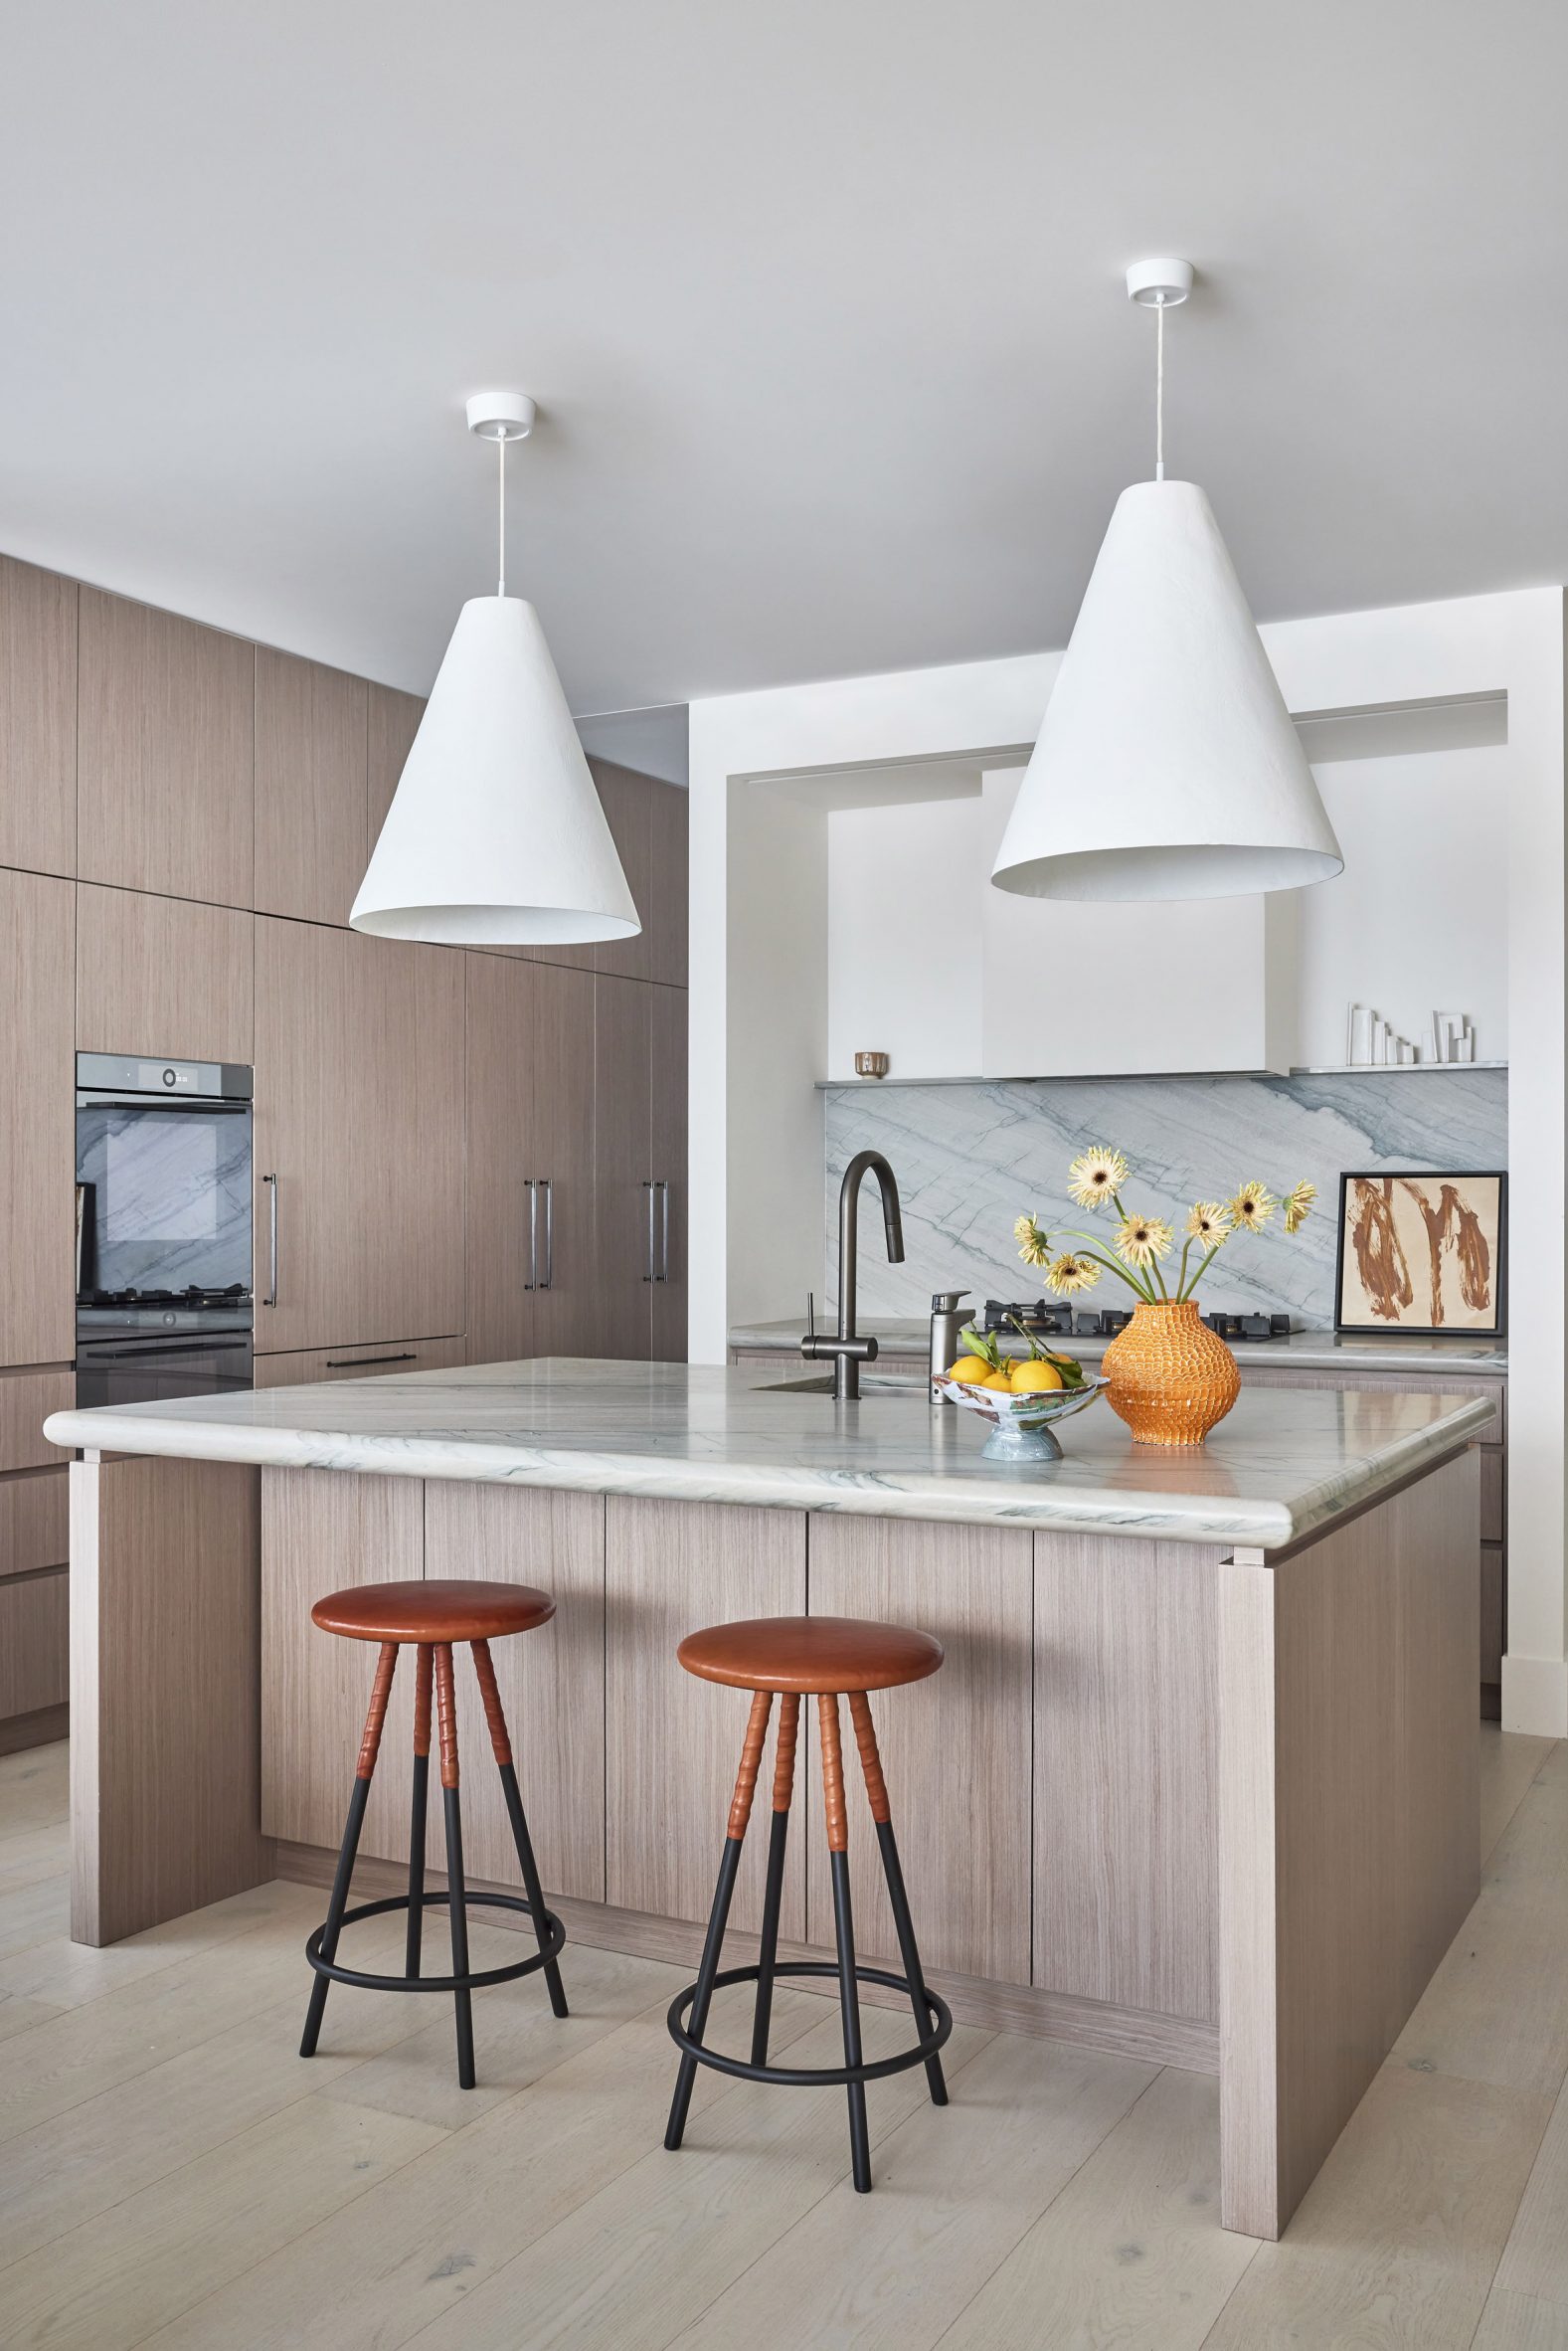 A kitchen with light wood cabintry, triangular lights, and a large island